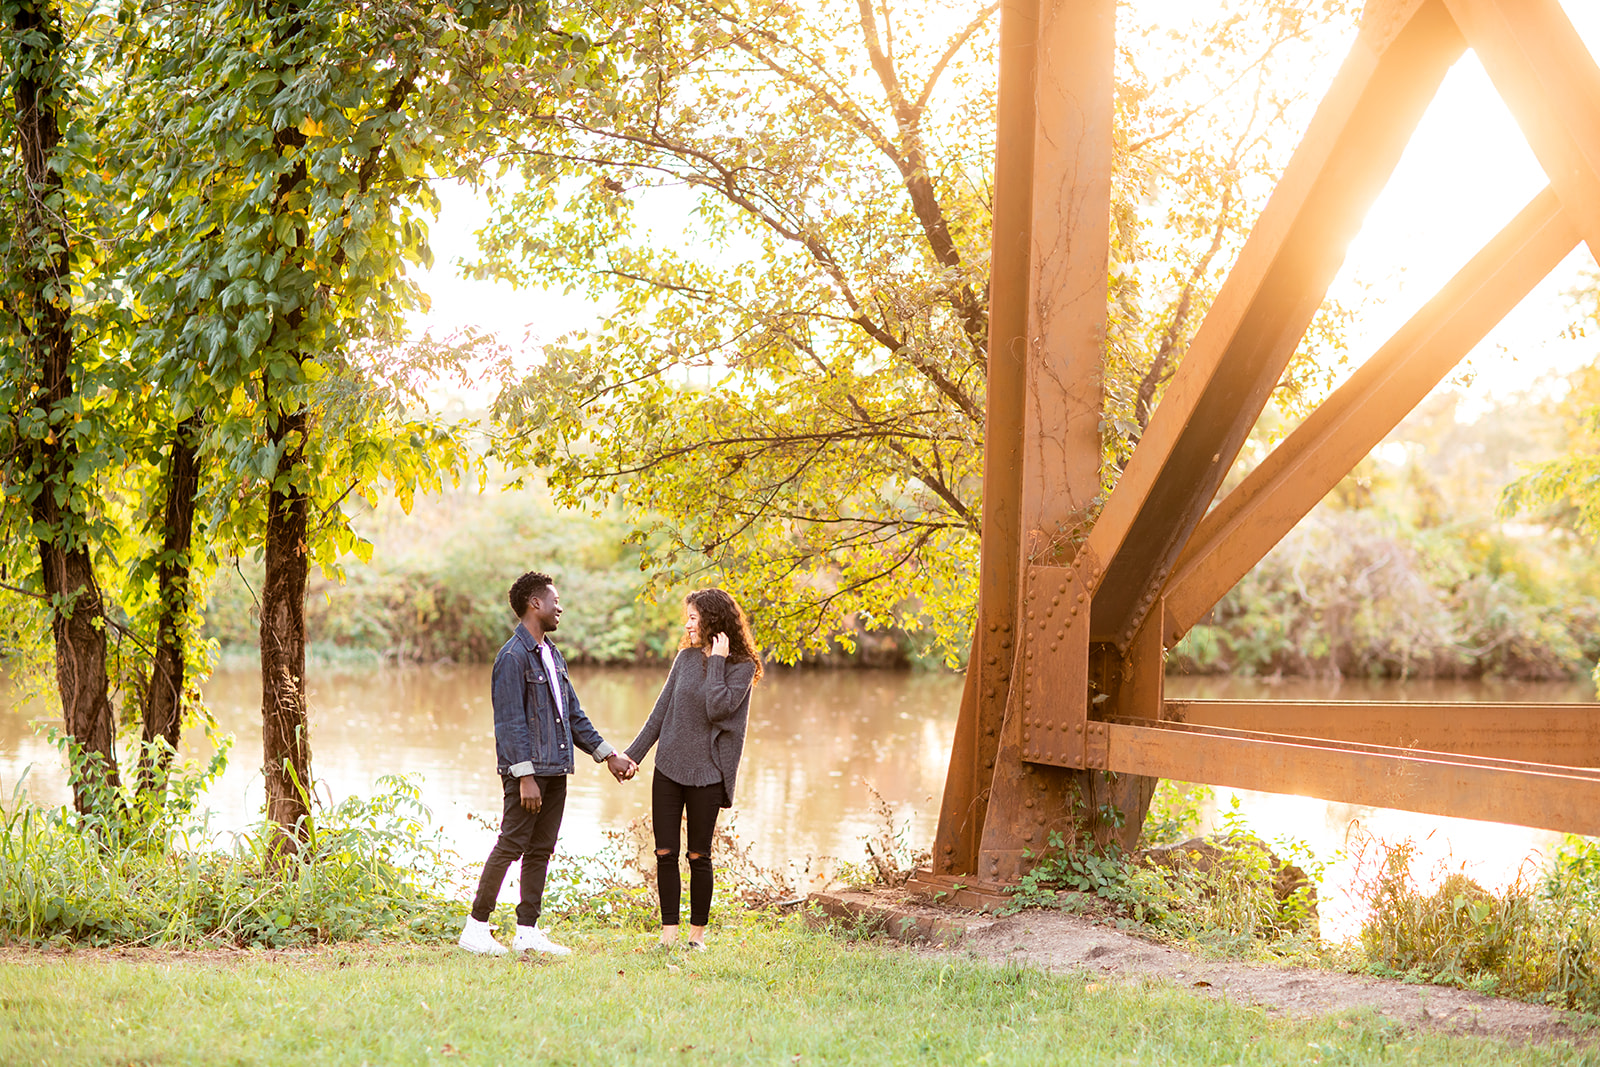 Urban RVA Engagement Shoot with Golden Light - Image Property of www.j-dphoto.com